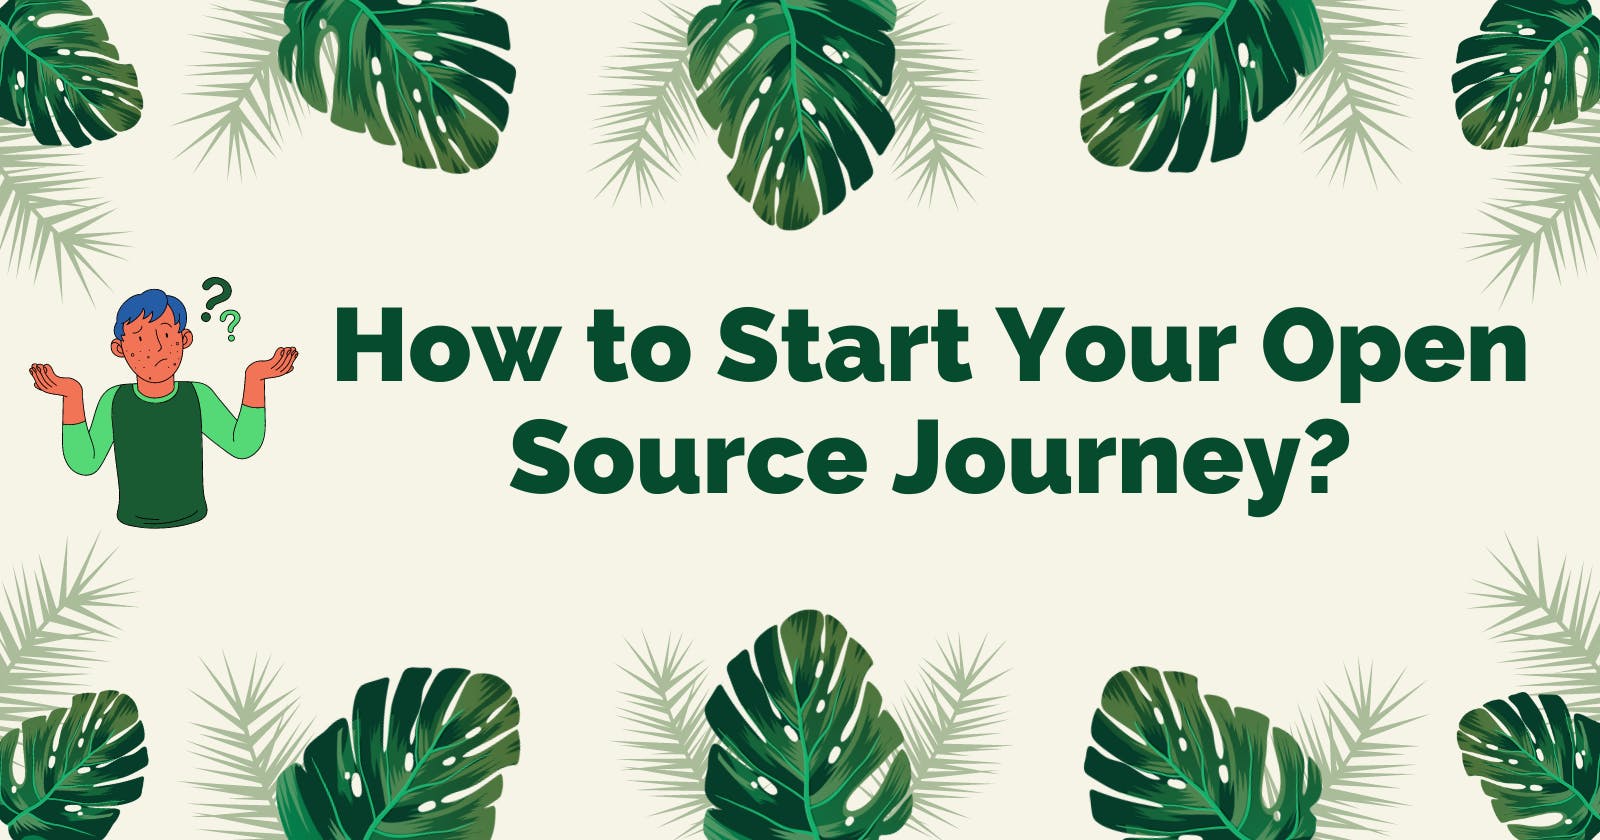 How to Start Your Open Source Journey?